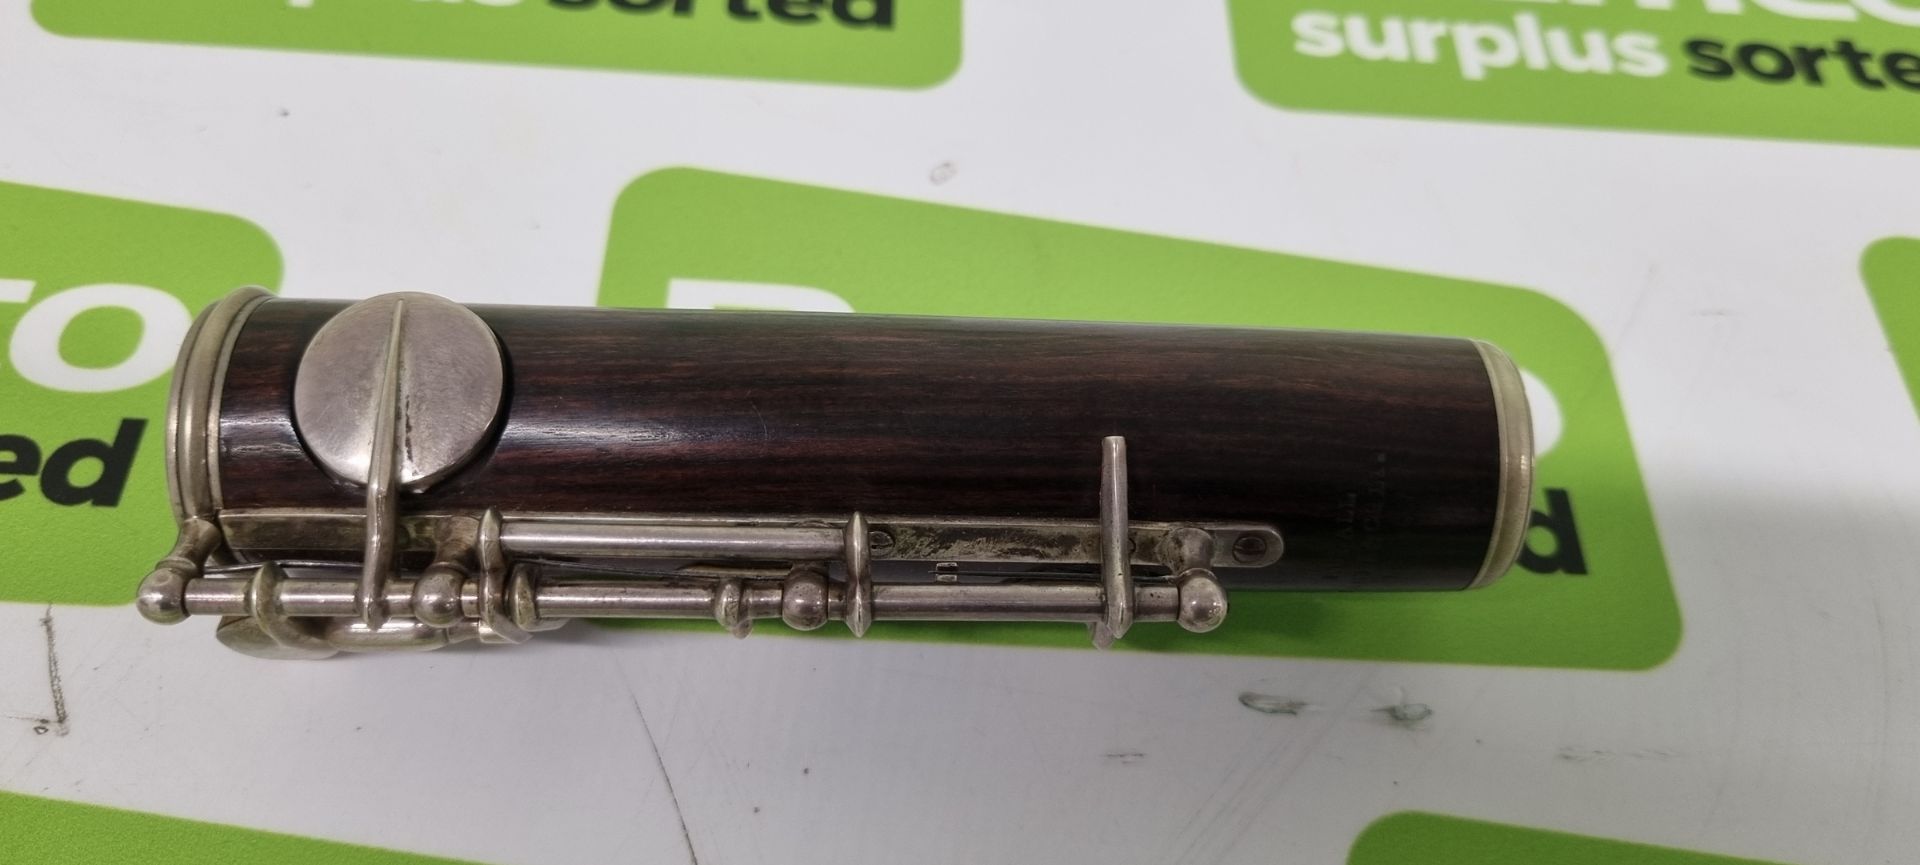 Rudall Carte wood flute with travel case - Image 7 of 11